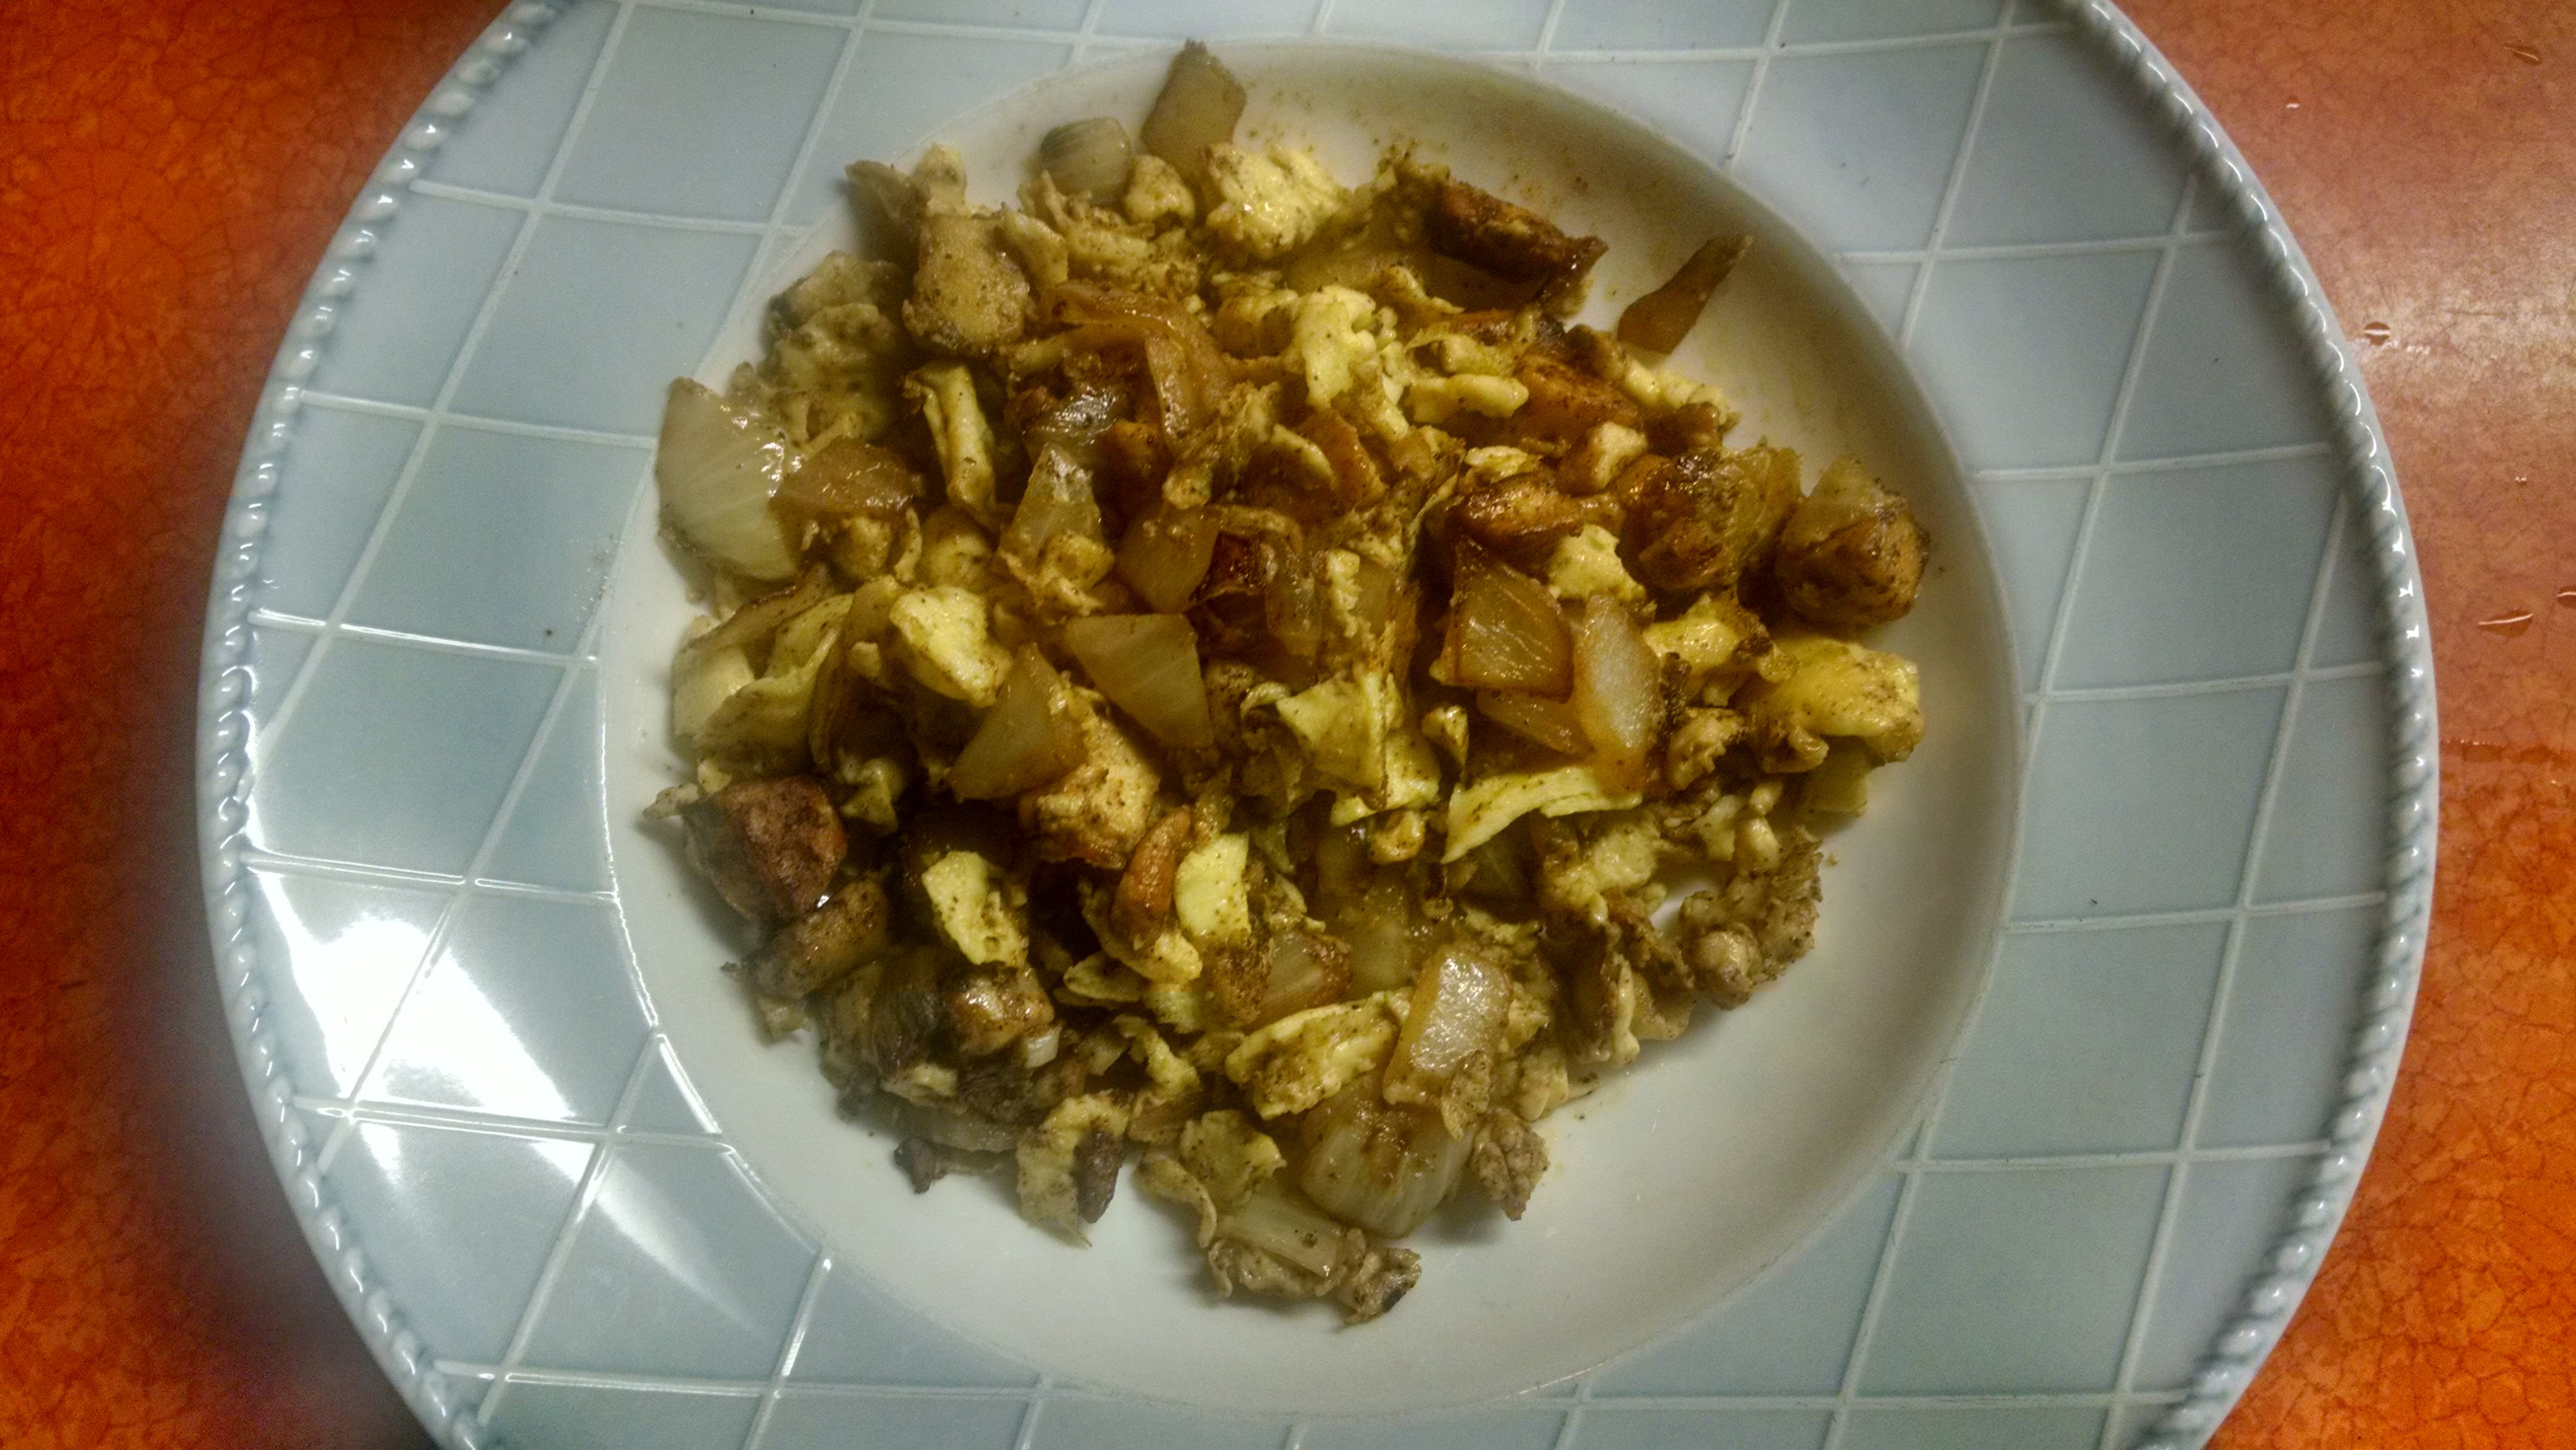 Last night's midnight snack.  I browned the puffball cubes in hot lard along with onions, garlic, cayenne powder and corriander, then I scrambled in a few eggs.  This morning I did the same thing, only adding in some fresh bell peppers and cayennes from the garden.